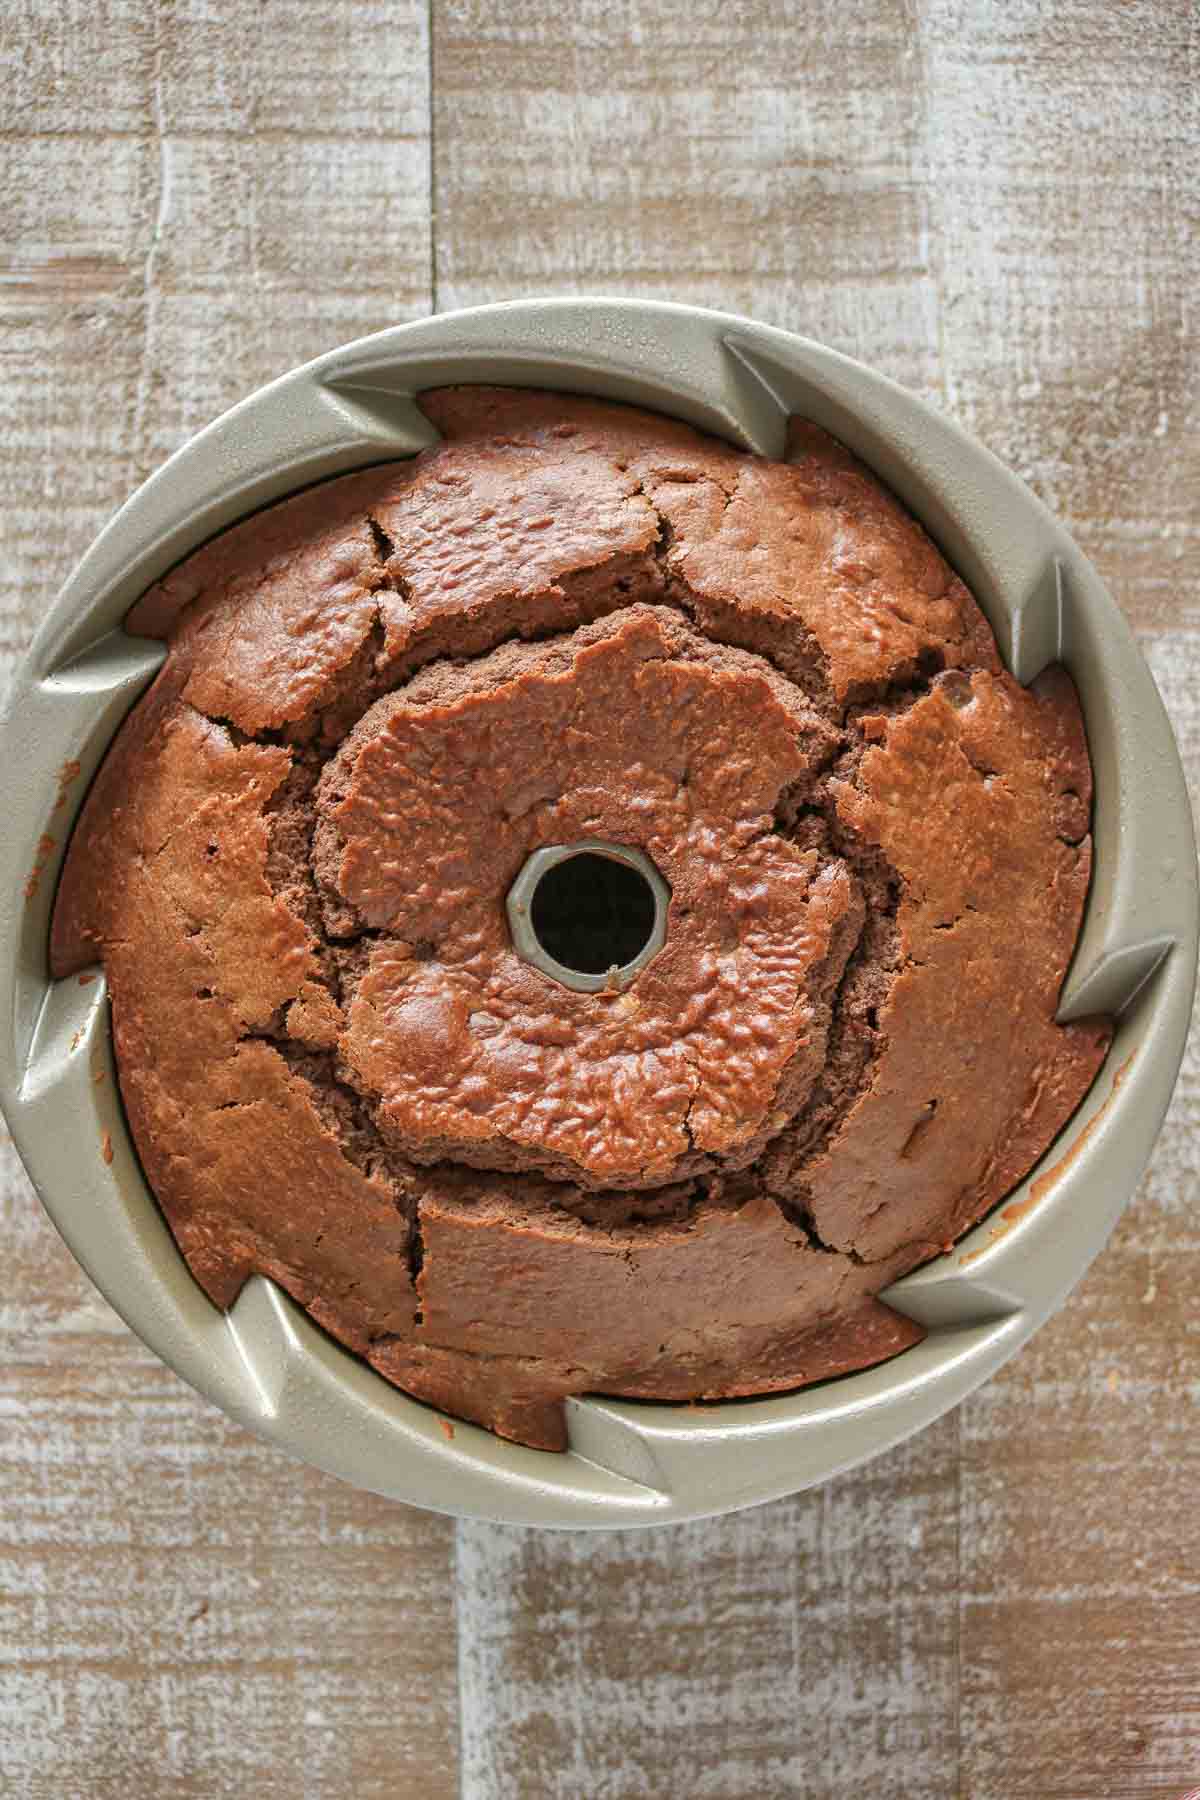 Baked cake in a fluted cake pan.